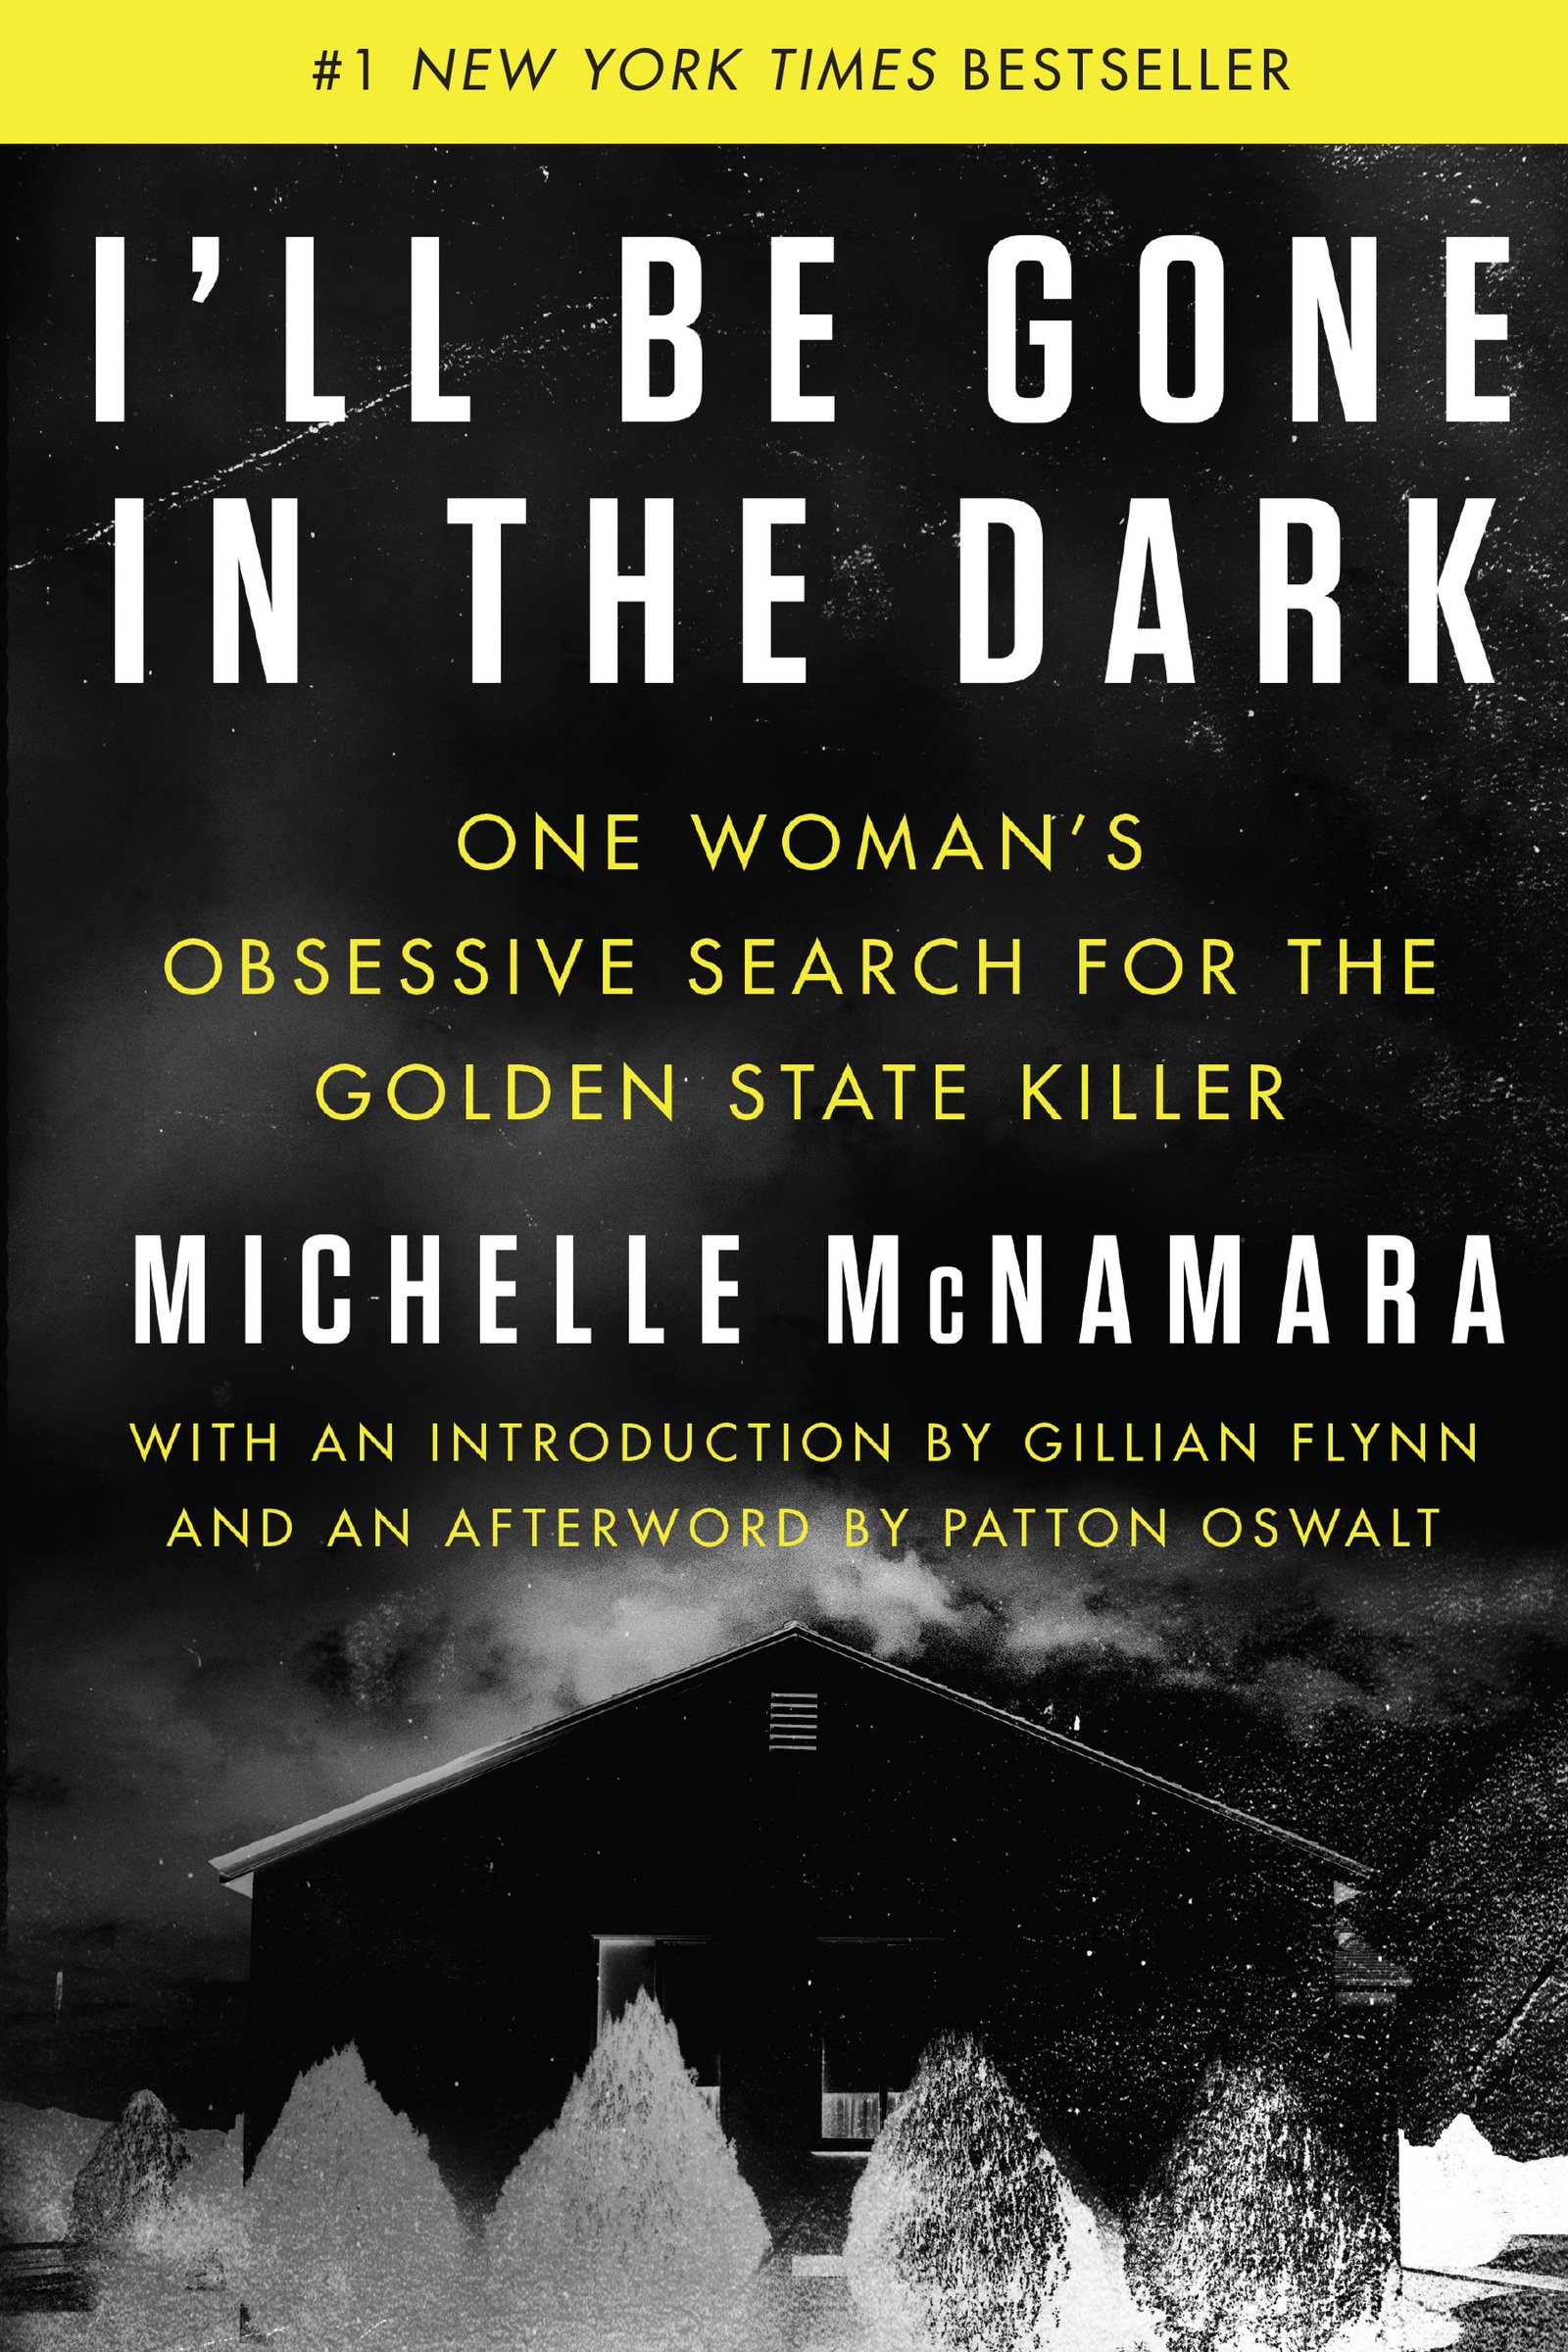 i'll be gone in the dark: one woman's obsessive search for the golden state killer by michelle mcnamara book cover